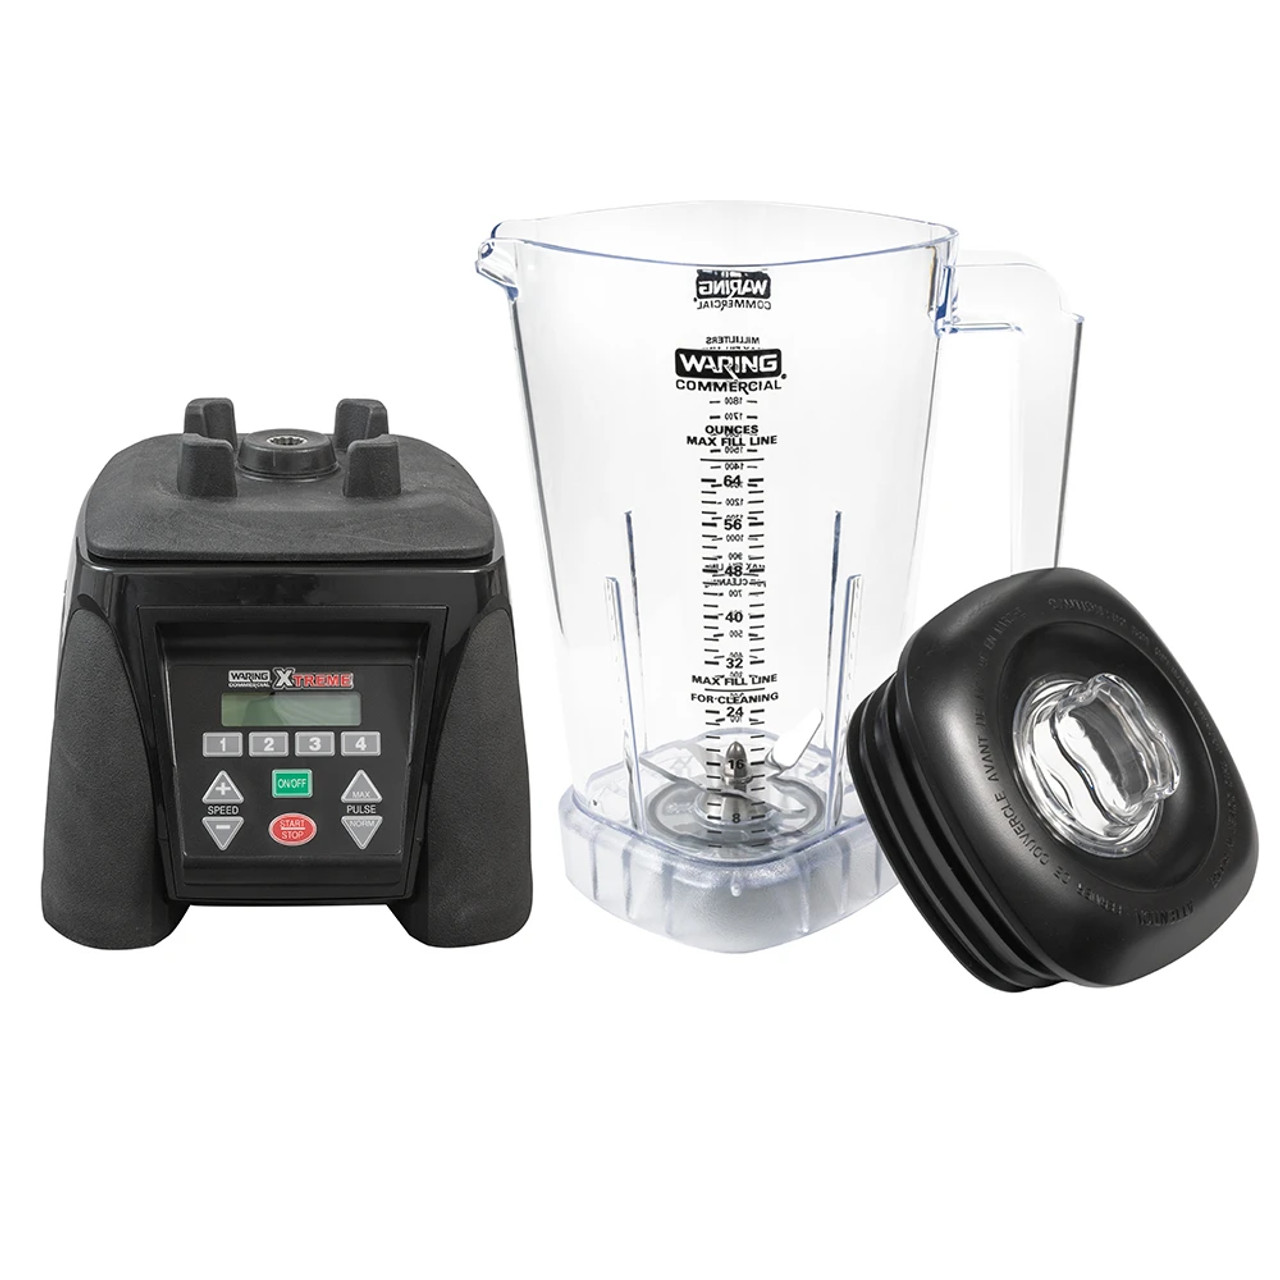 Waring Countertop Drink Blender w/ Copolyester Container, Pre-Programmed - Chicken Pieces